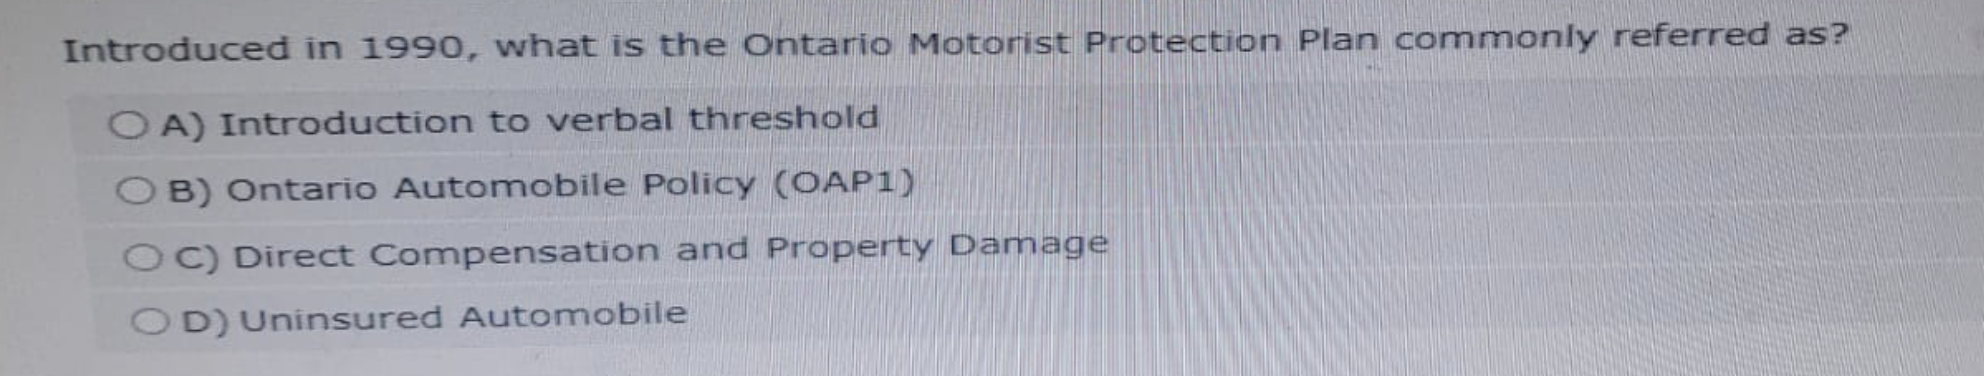 Introduced in 1990, what is the Ontario Motorist Protection Plan commonly referred as?
OA) Introduction to verbal threshold
B) Ontario Automobile Policy (OAP1)
OC) Direct Compensation and Property Damage
OD) Uninsured Automobile